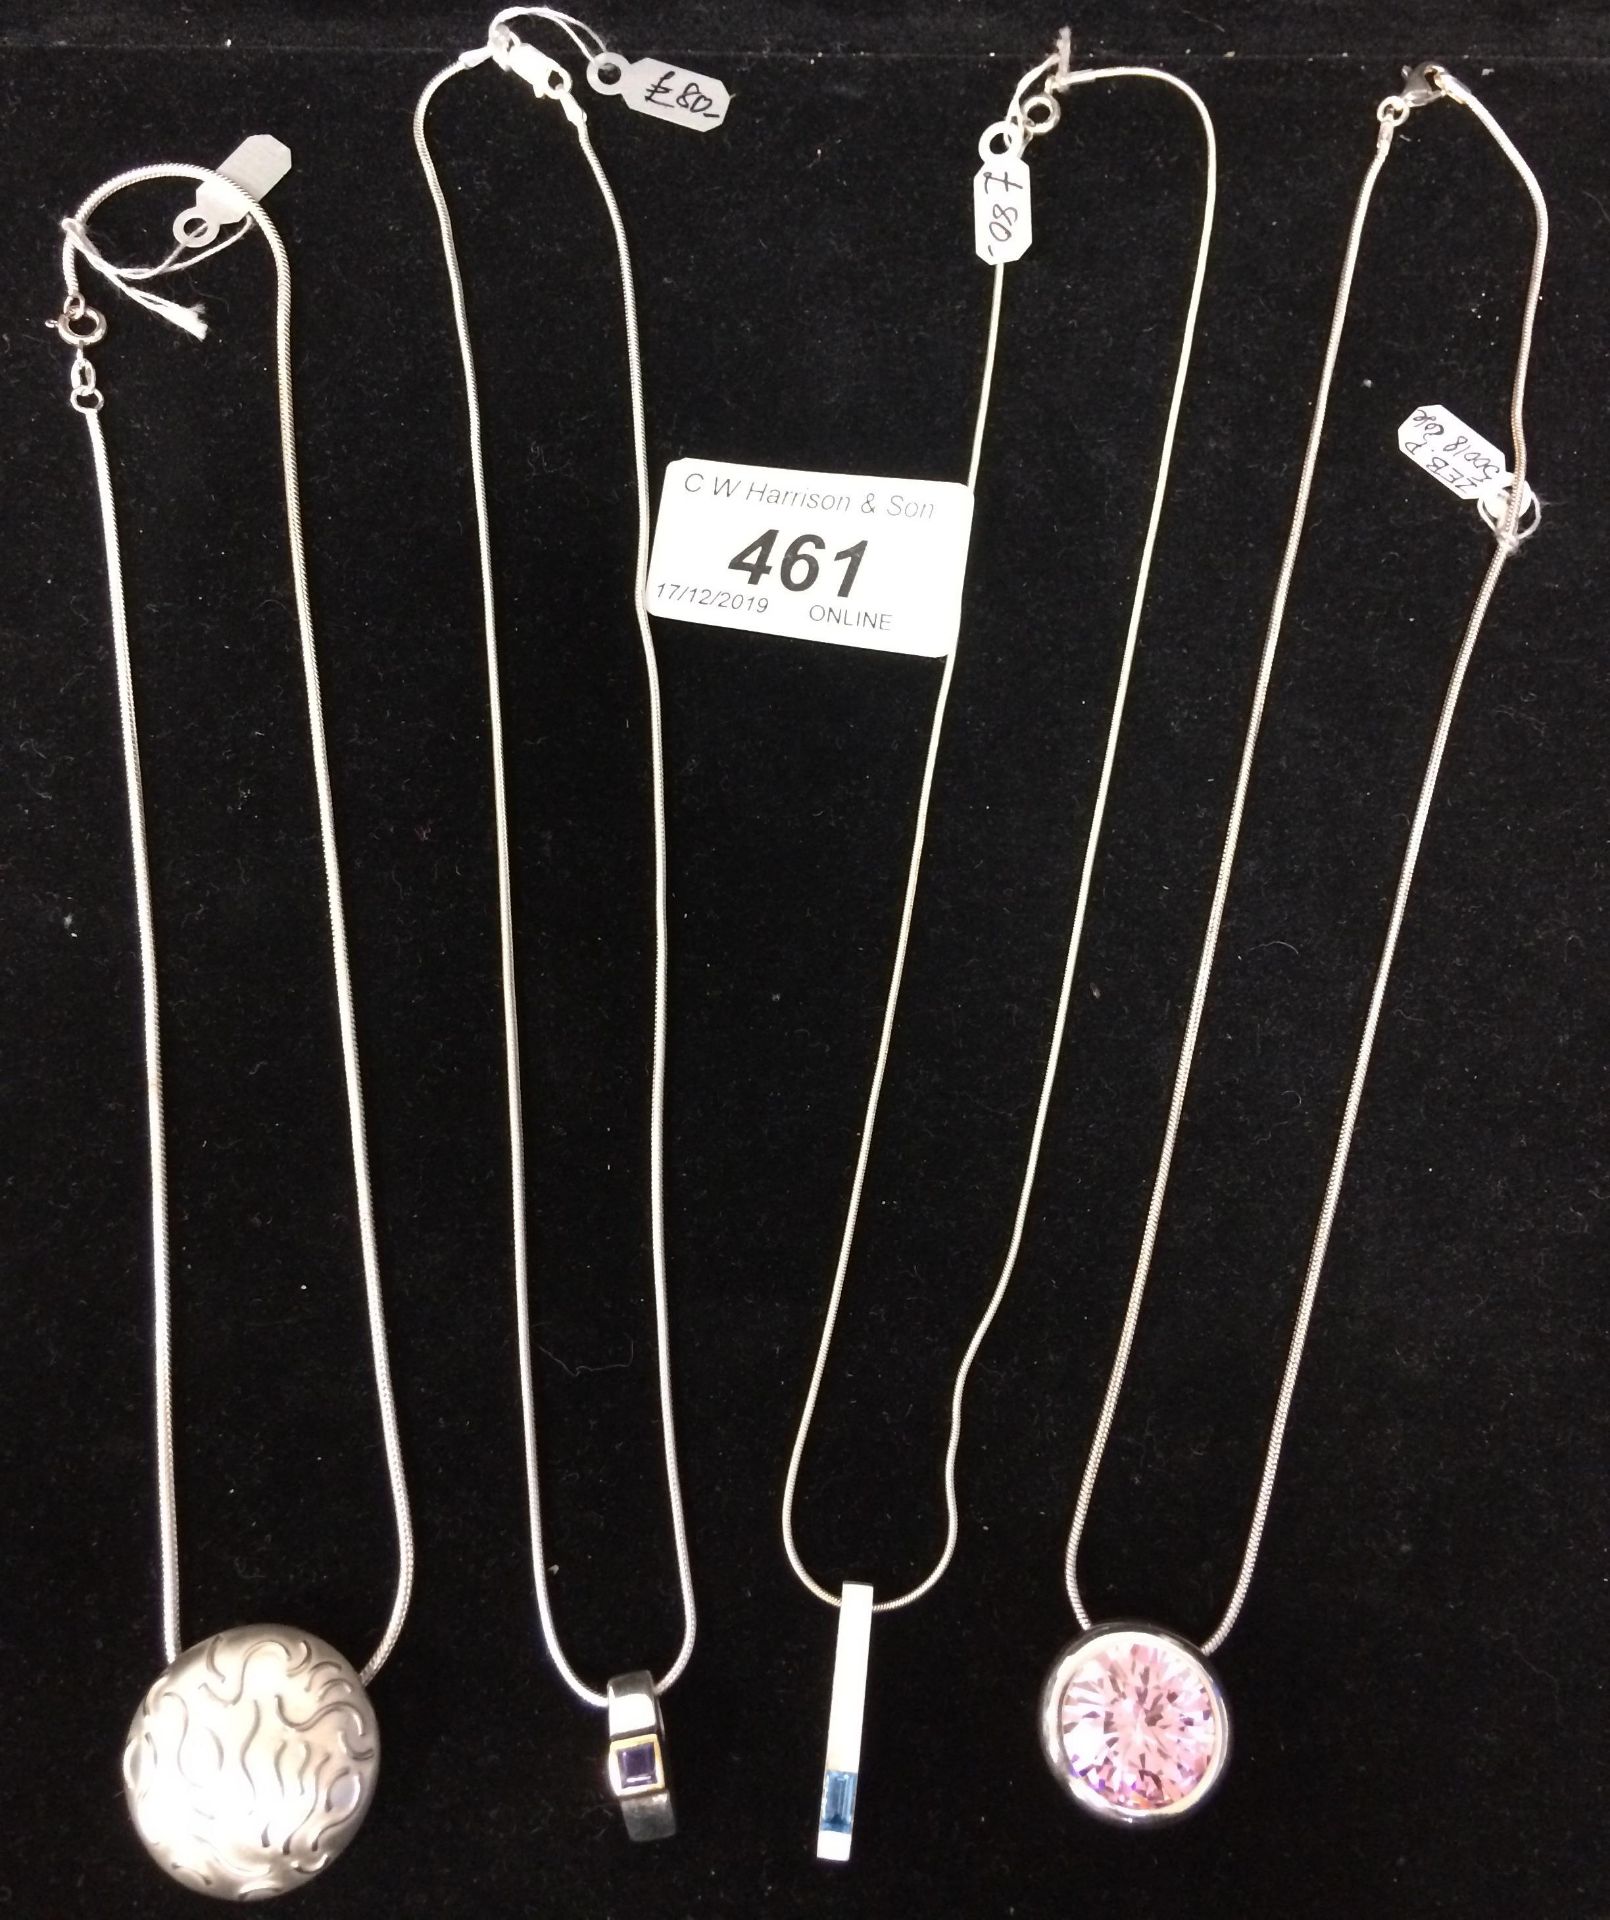 4 x 925 sterling silver necklaces RRP £70-£95 (please note this lot is subject to VAT)